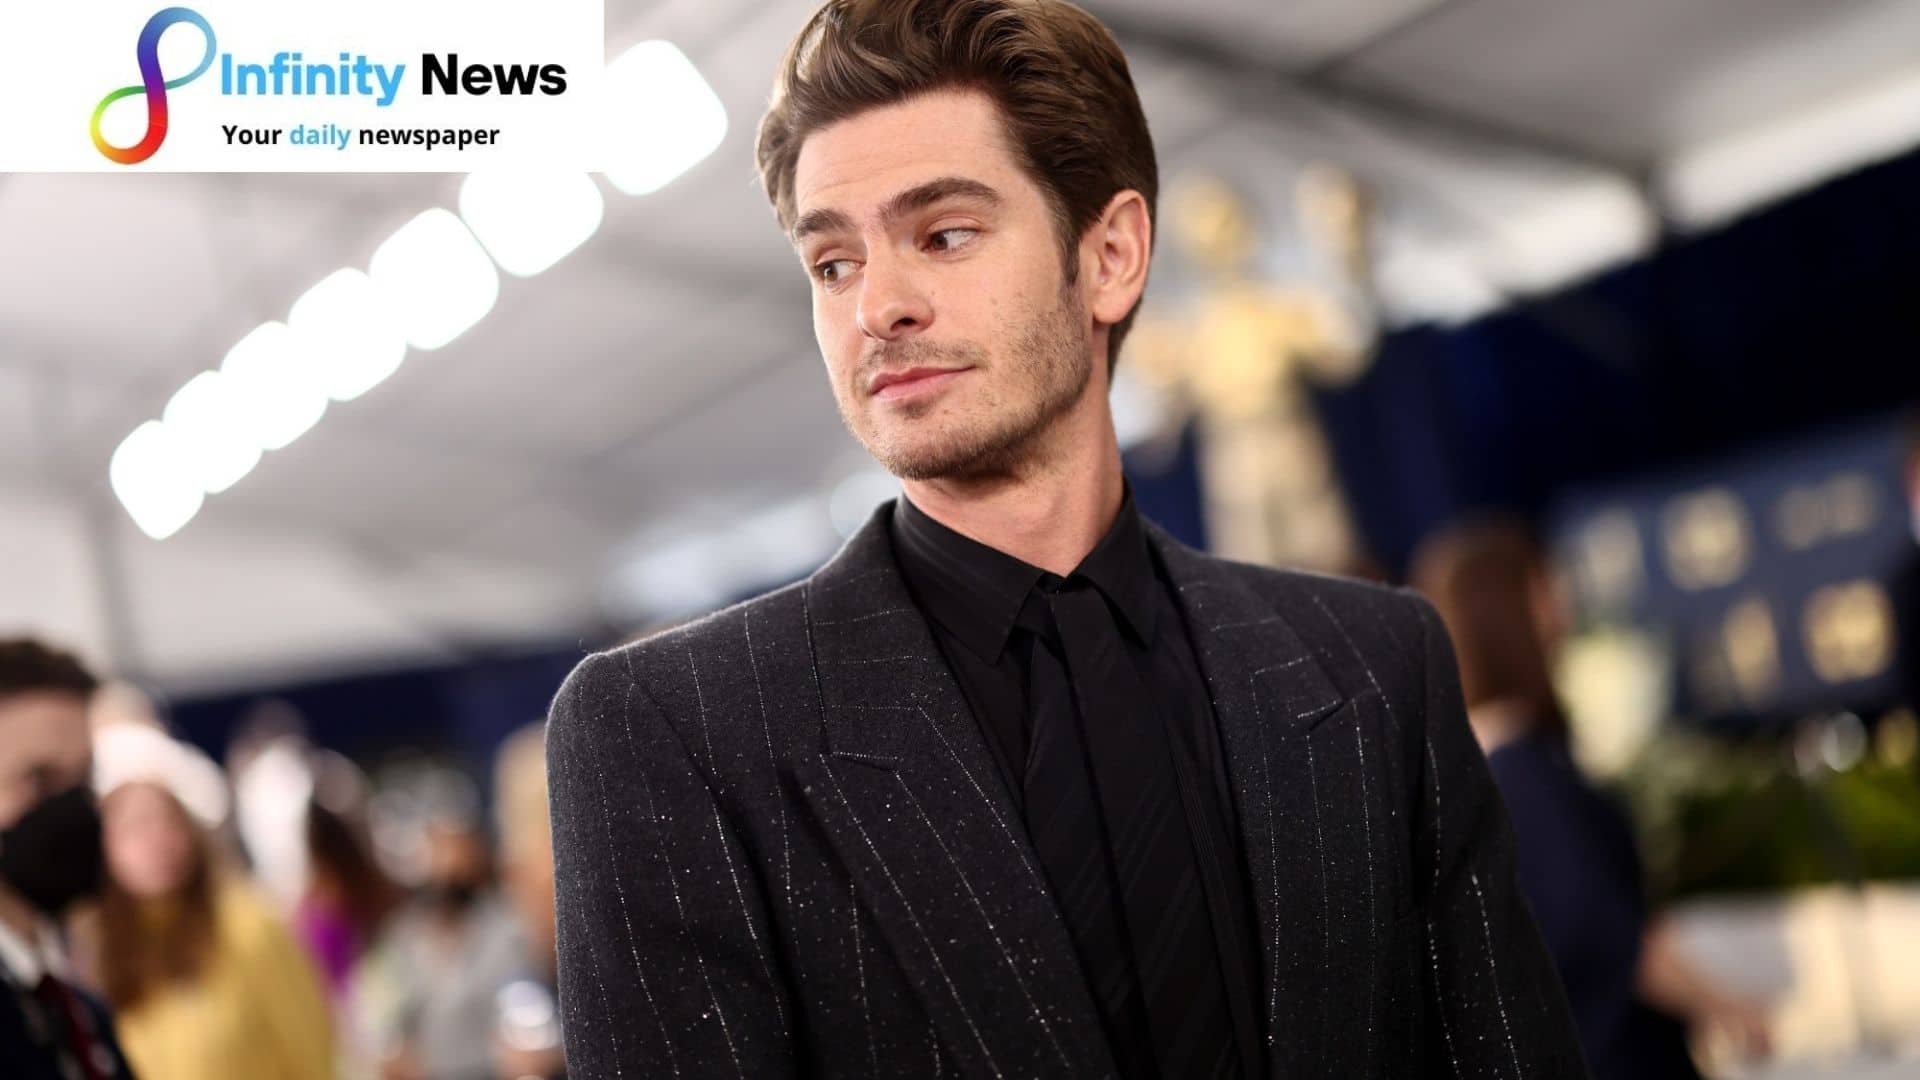 Andrew Garfield reports he is stopping acting to zero